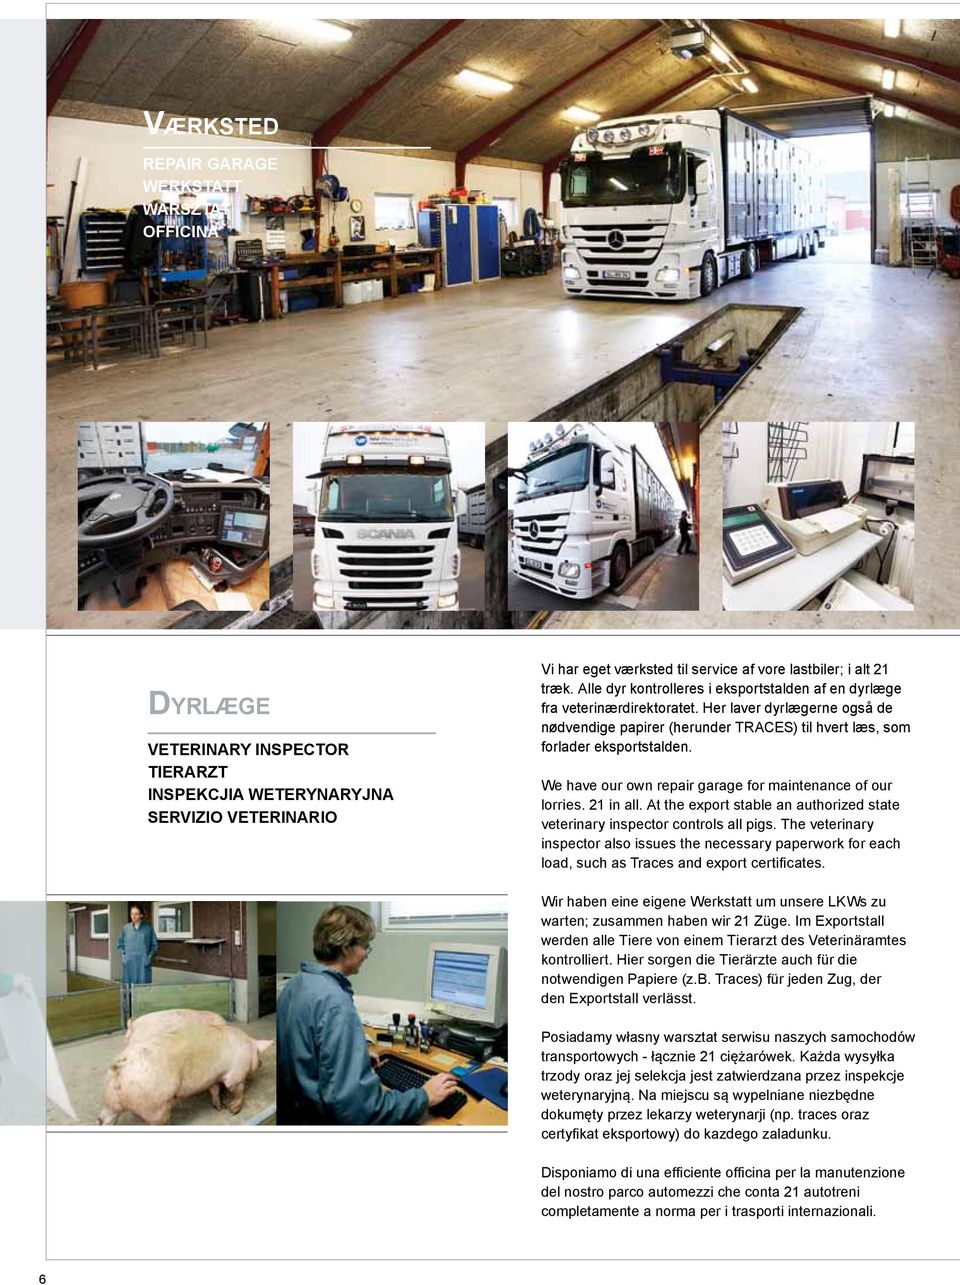 We have our own repair garage for maintenance of our lorries. 21 in all. At the export stable an authorized state veterinary inspector controls all pigs.